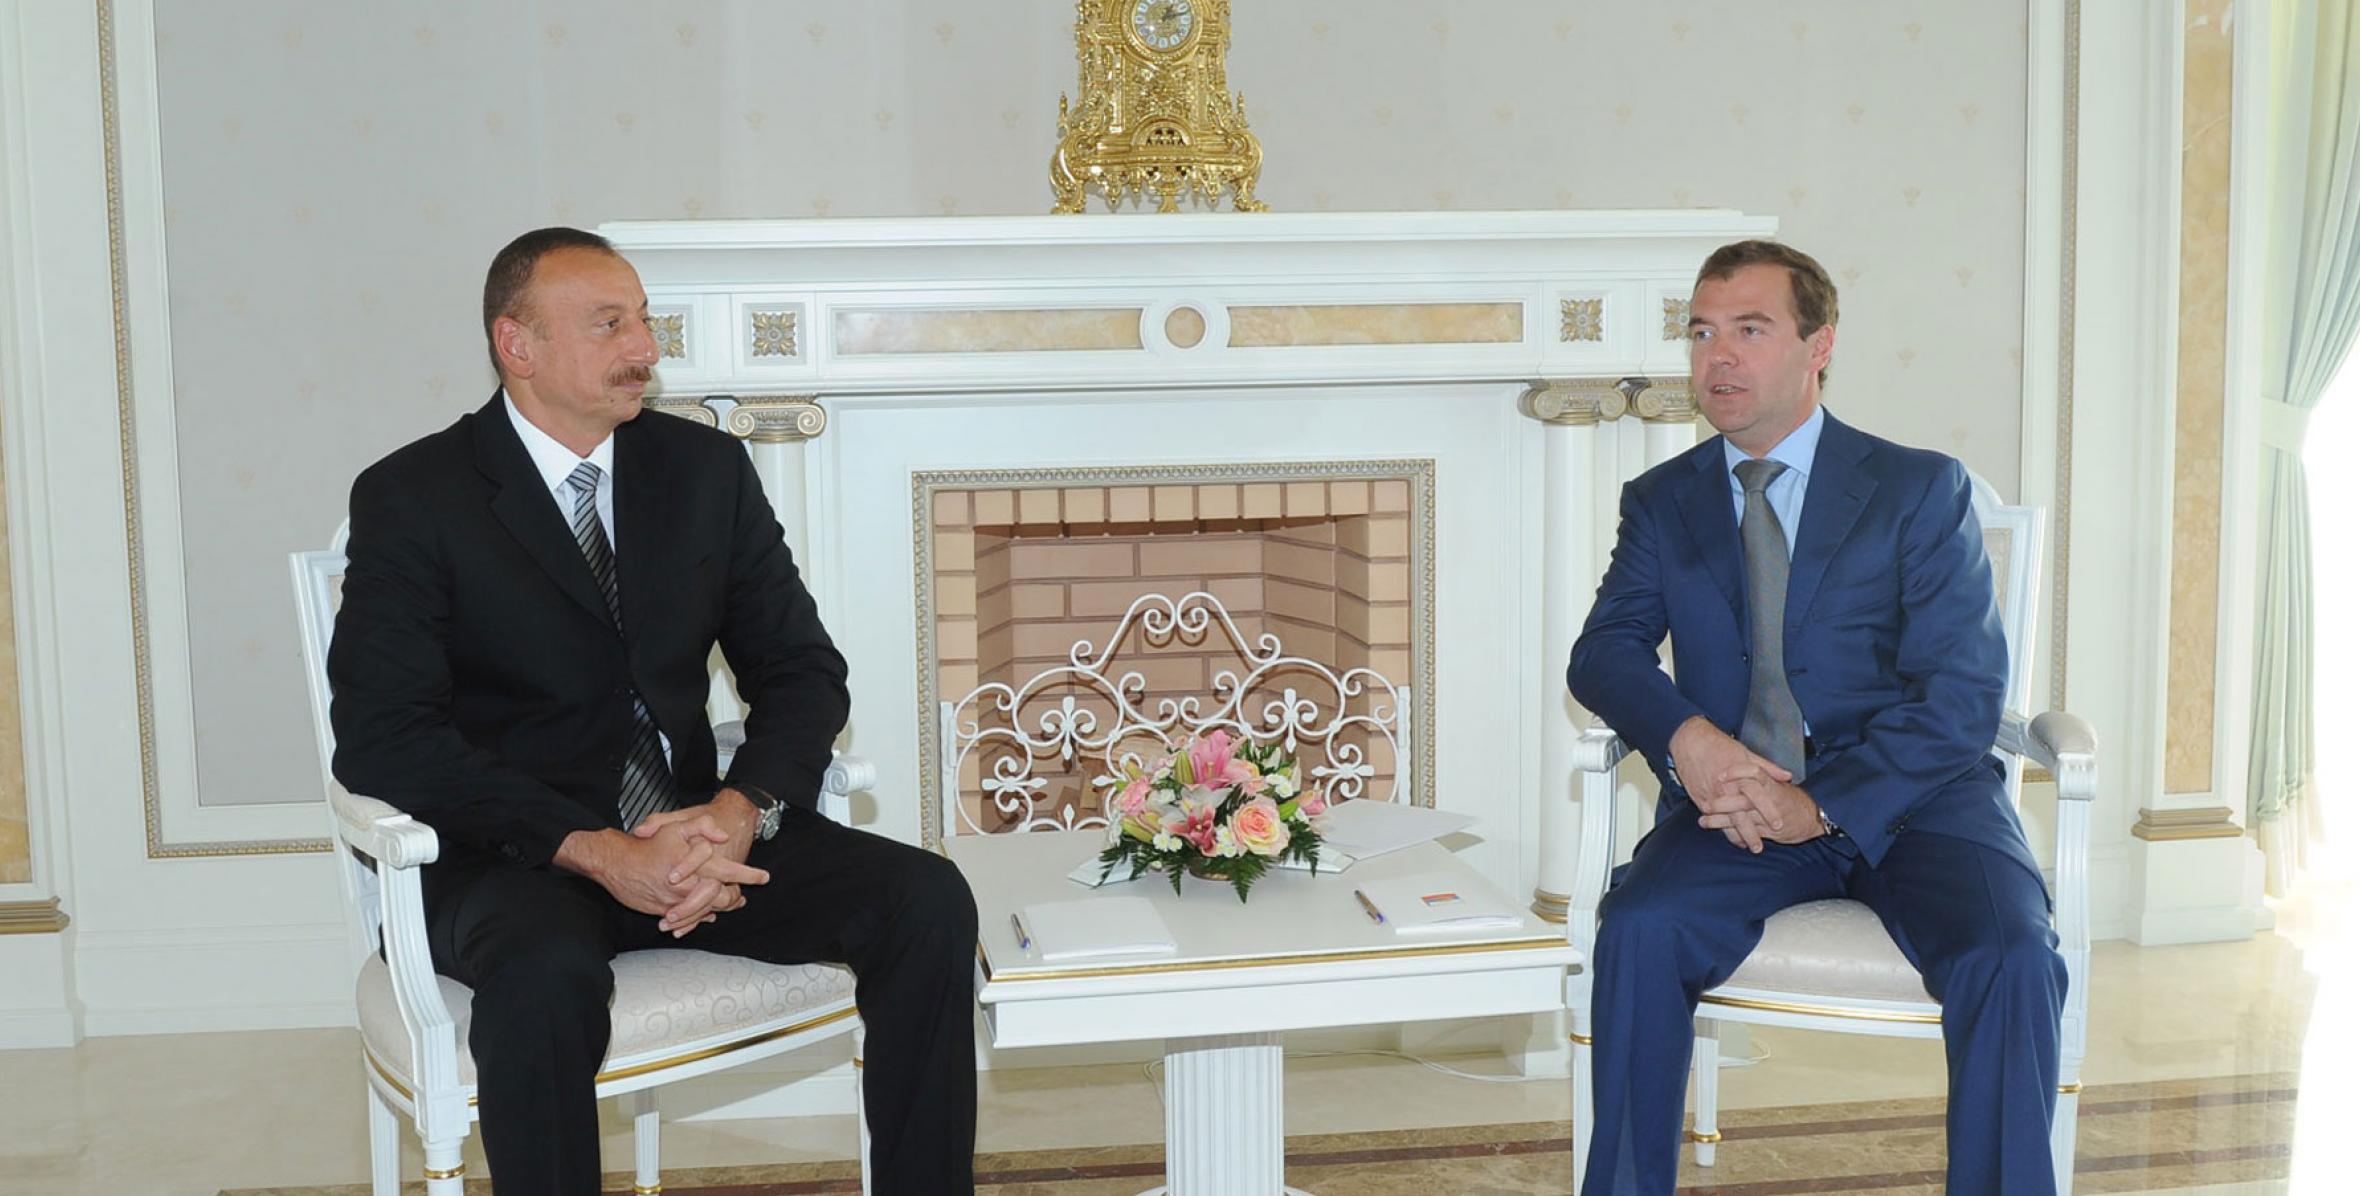 Ilham Aliyev met with President of the Russian Federation Dmitry Medvedev